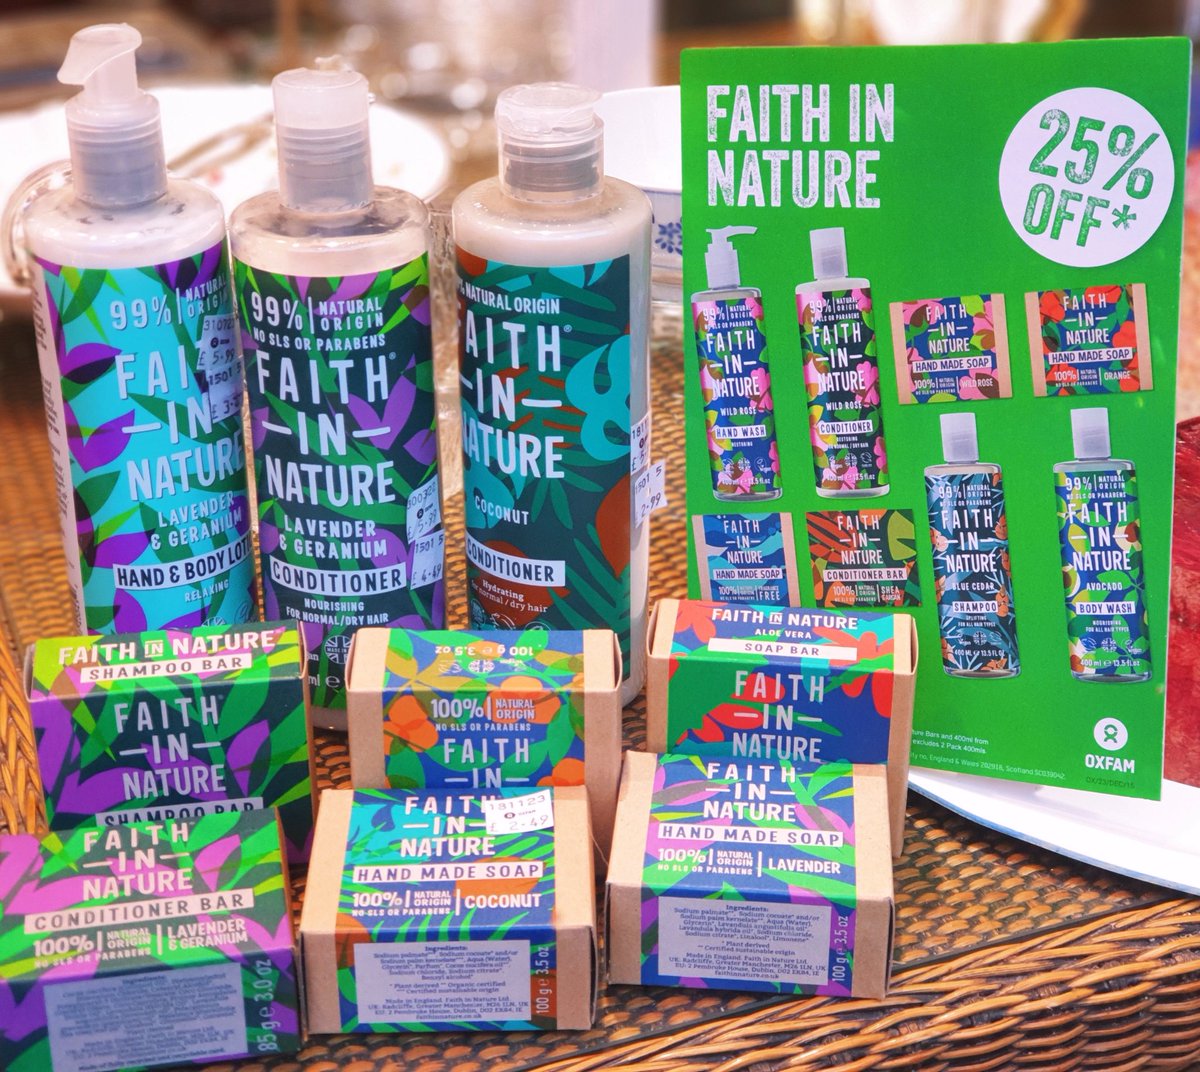 A reminder that we've taken 25% off fabulous @FaithInNature products....but only until 30th January so come down for a browse and choose your favourites! #Oxfam #Harpenden is open from 10am to 5pm Mon to Sat at 3, Harding Parade #SourcedByOxfam #OxfamHarpenden #HarpendenLife